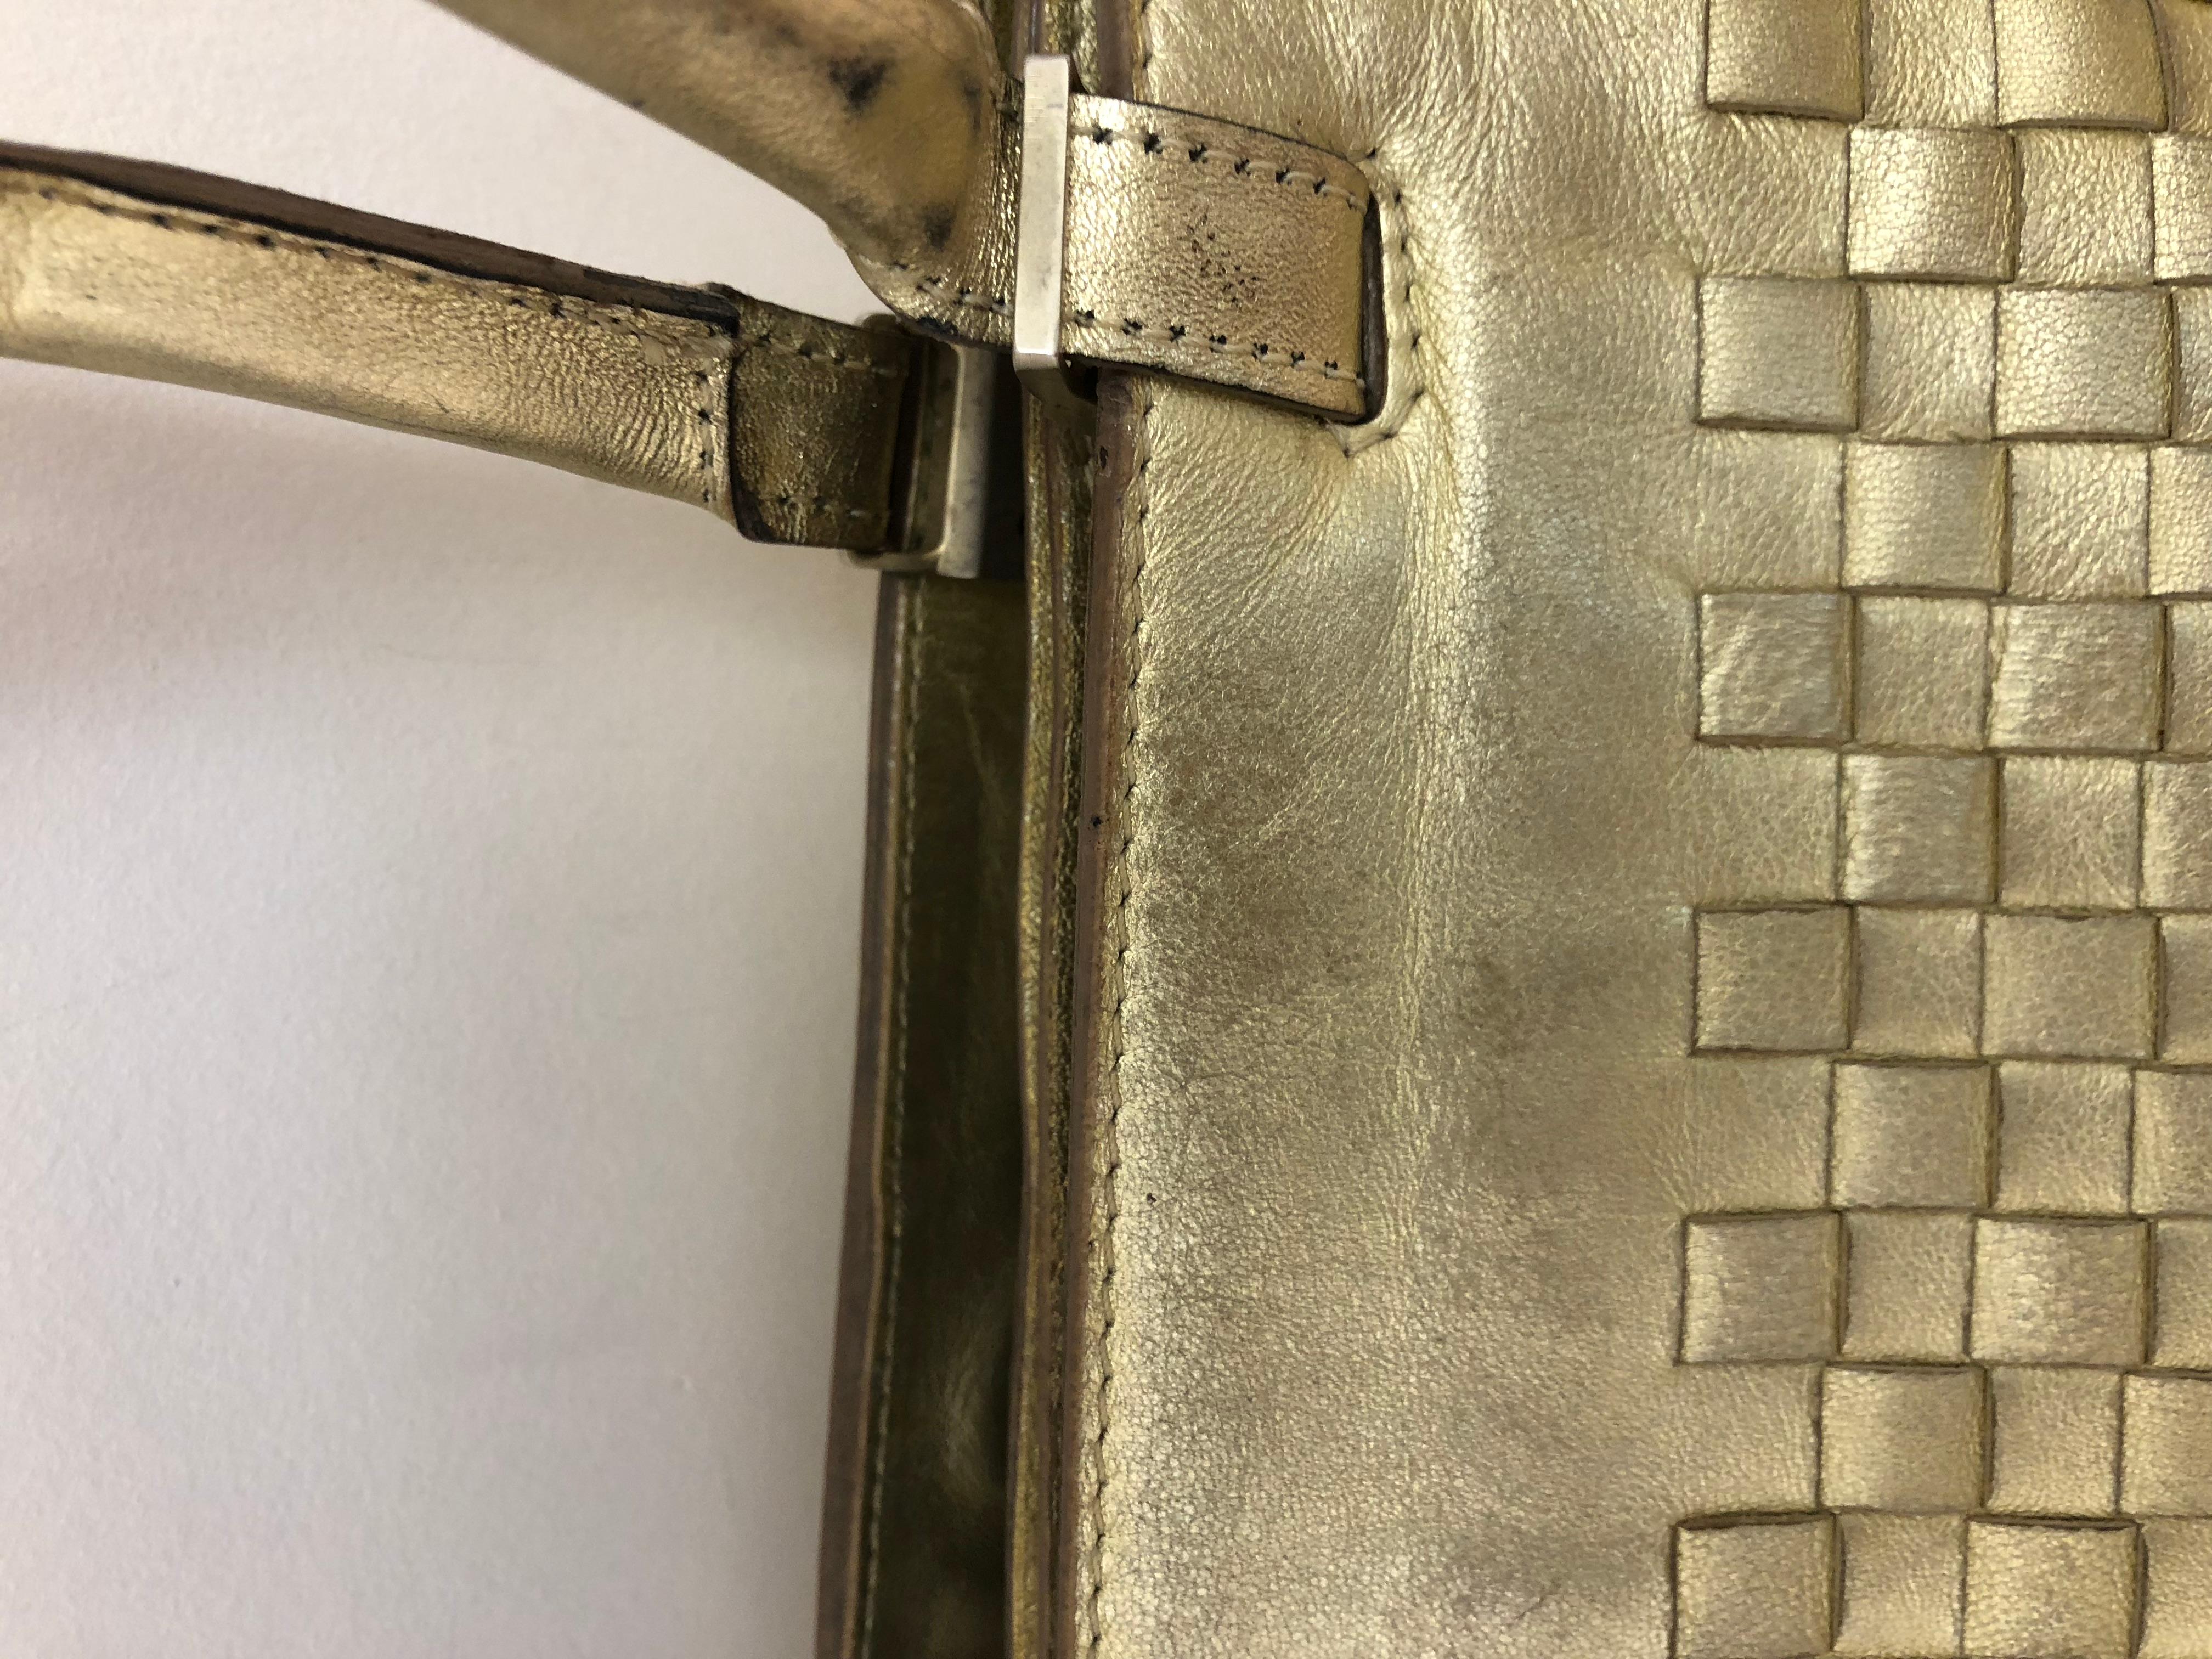 In fair condition because of loss of some of the gold patina, a few pen marks on the inside, and a magnetic closure which requires some repair, the price reflects these fixable faults.

The bag features two separate compartments one with a top zip